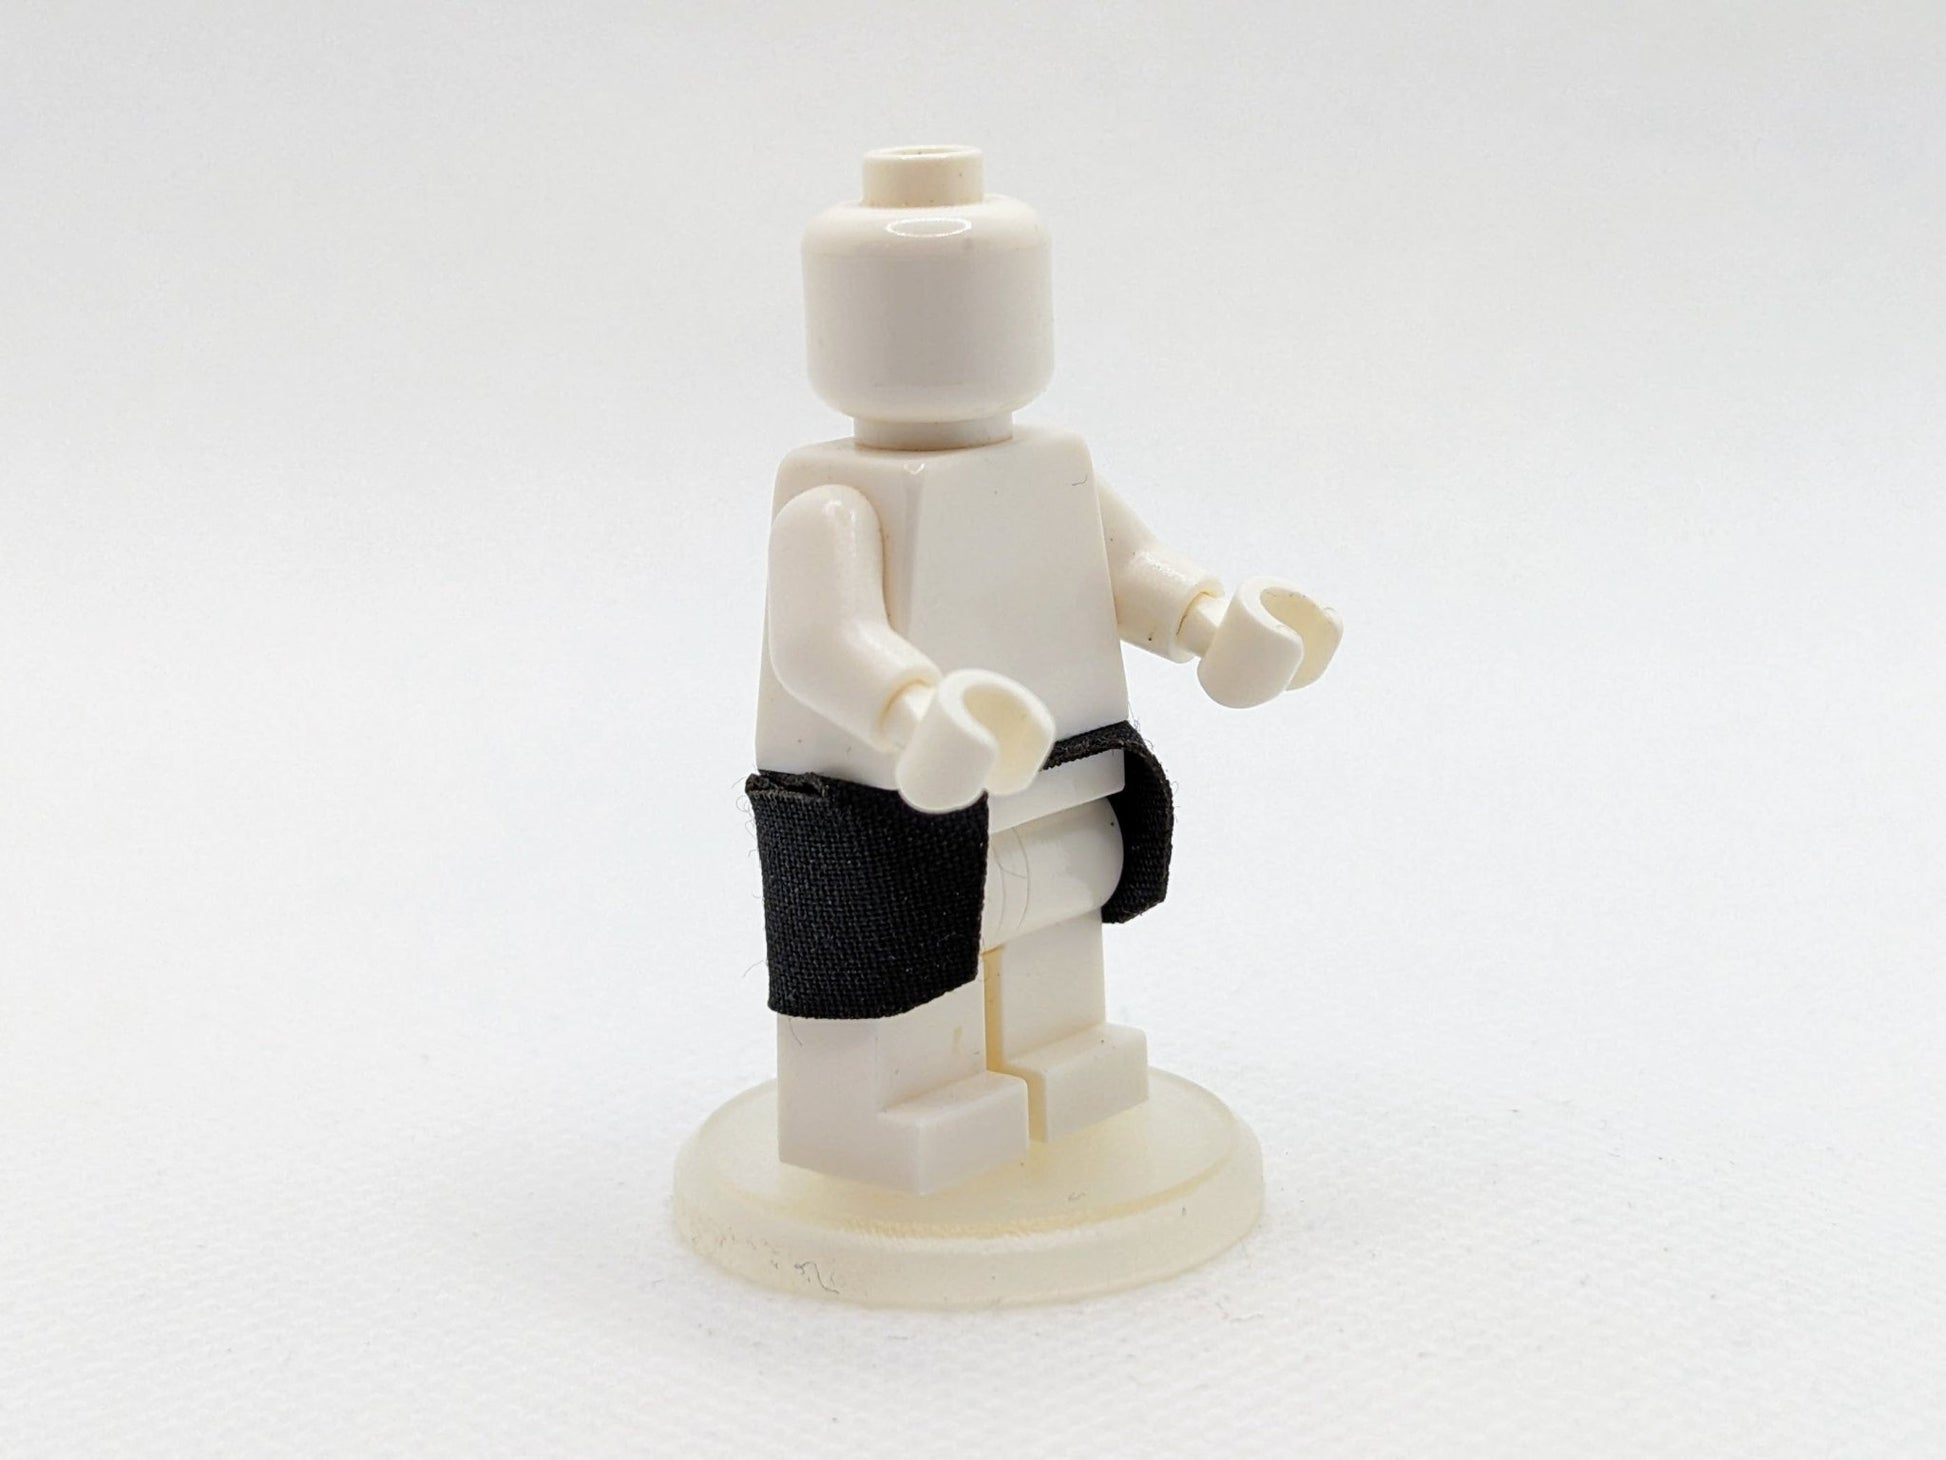 Waist Cape by capes4minifigs - RPGminifigs